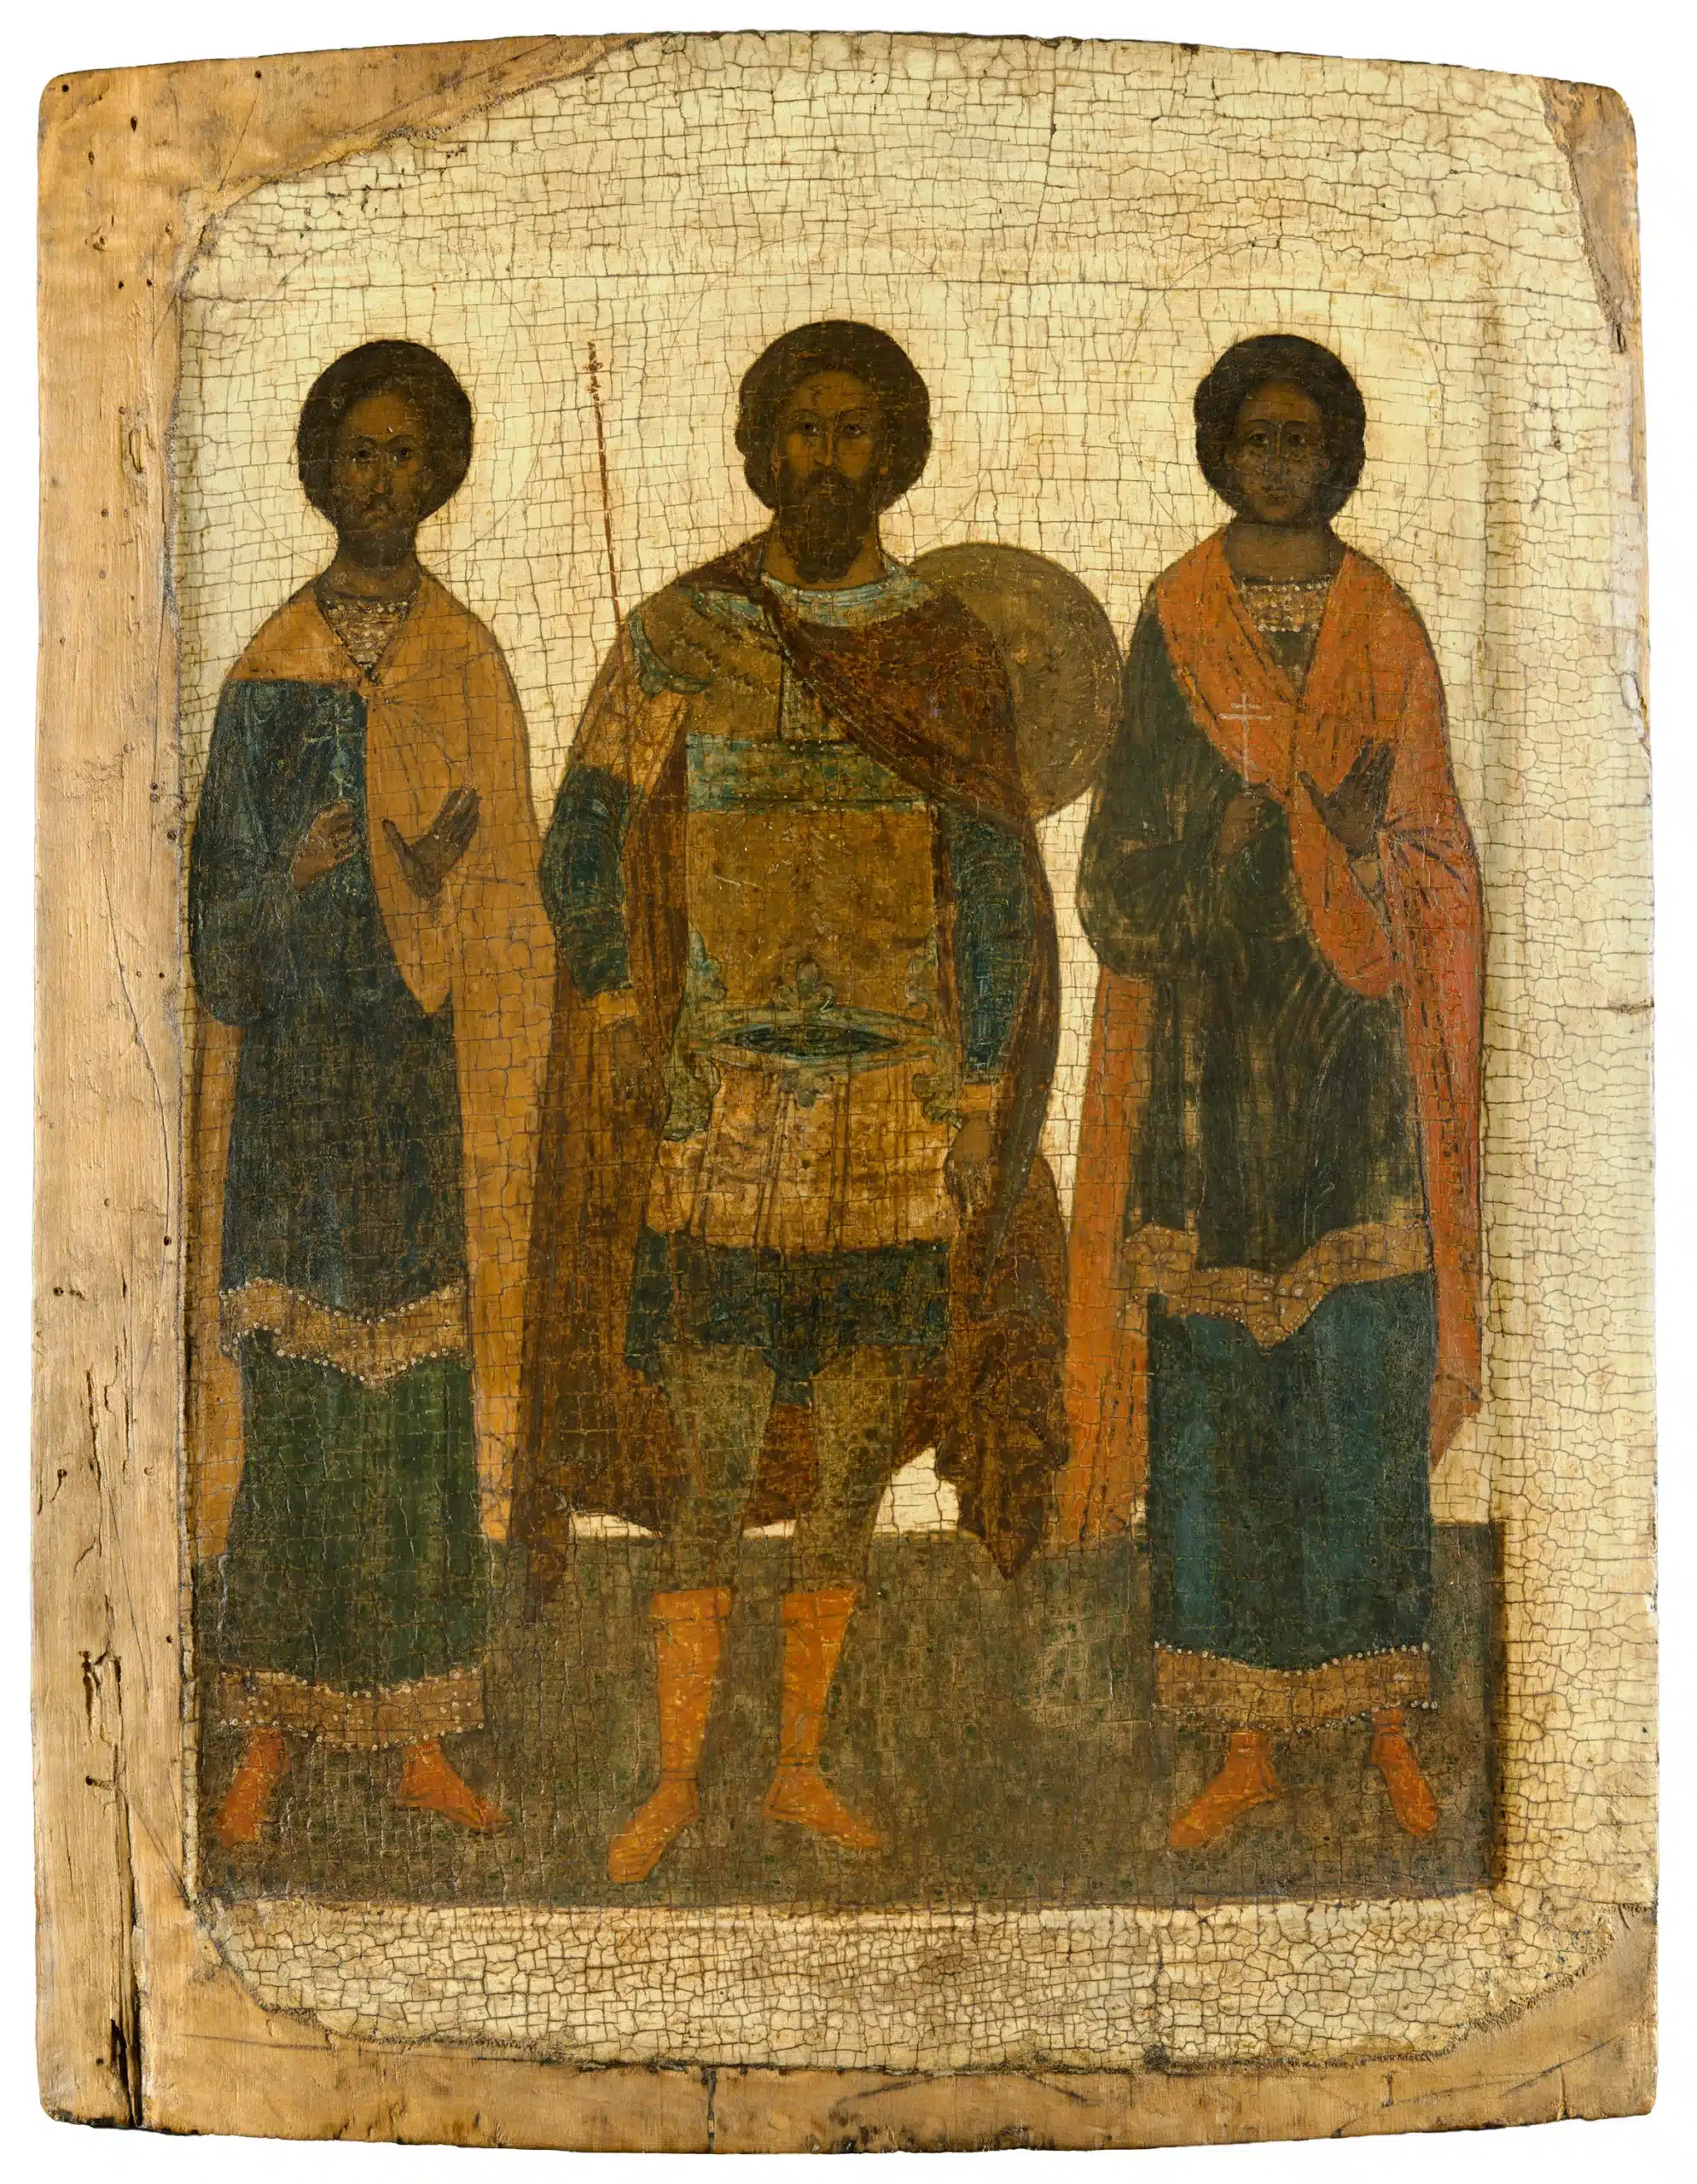 Saints Theodore Stratelates, Florus, and Laurus - The Icon Museum and ...